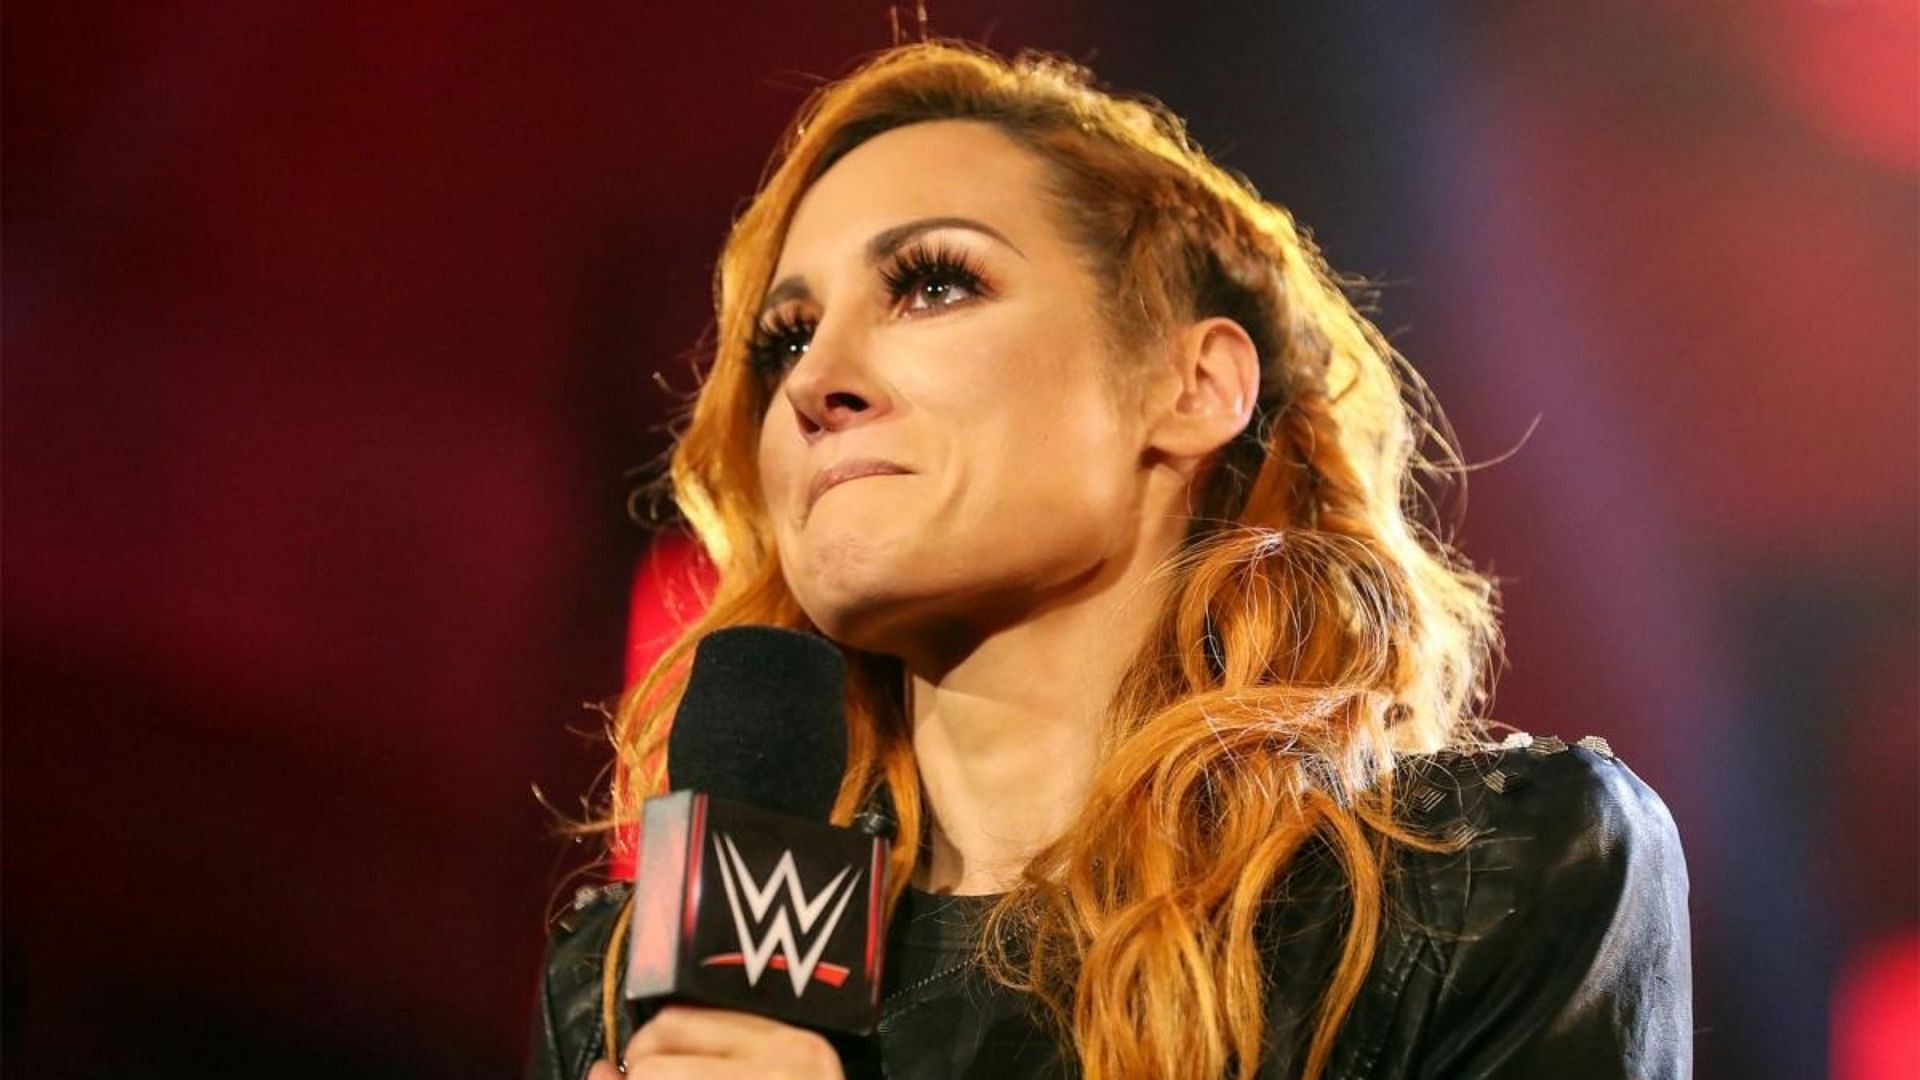 Becky Lynch is a former RAW and SmackDown Women